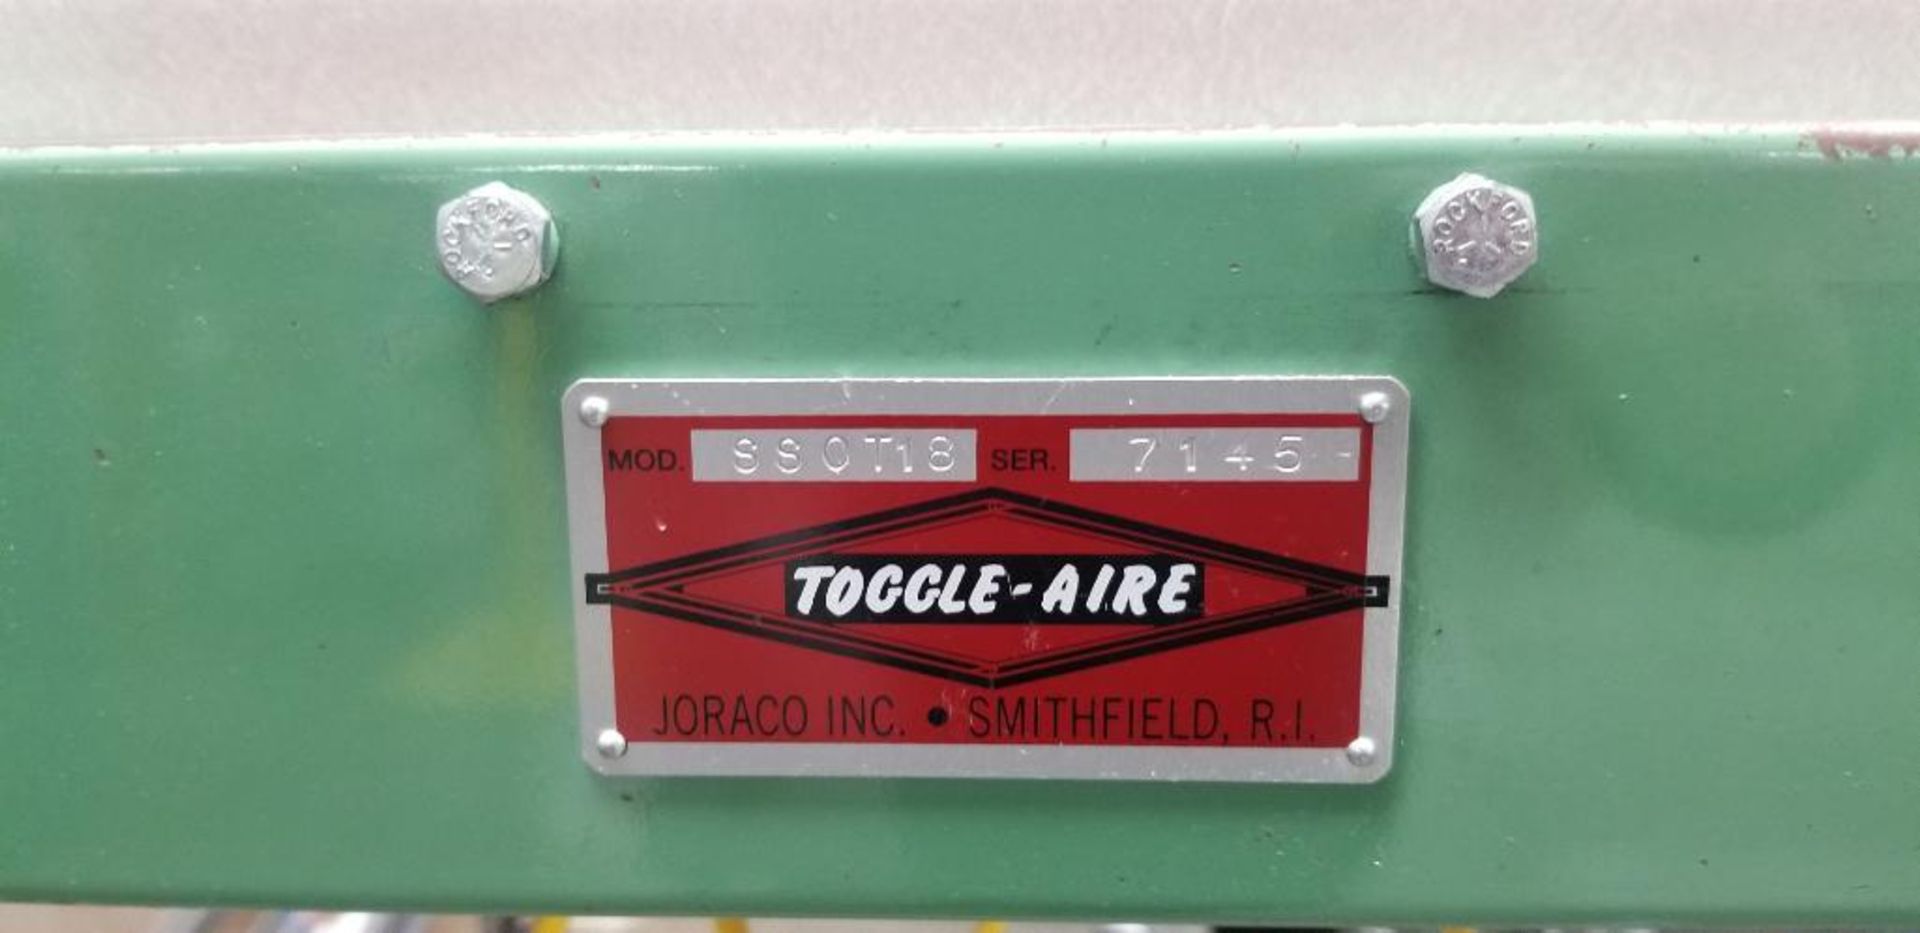 Joraco Toggle-Aire Benchtop Pneumatic Toggle Press, Model 1030CSROT, S/N 93302, w/ Toggle-Aire Model - Image 5 of 5